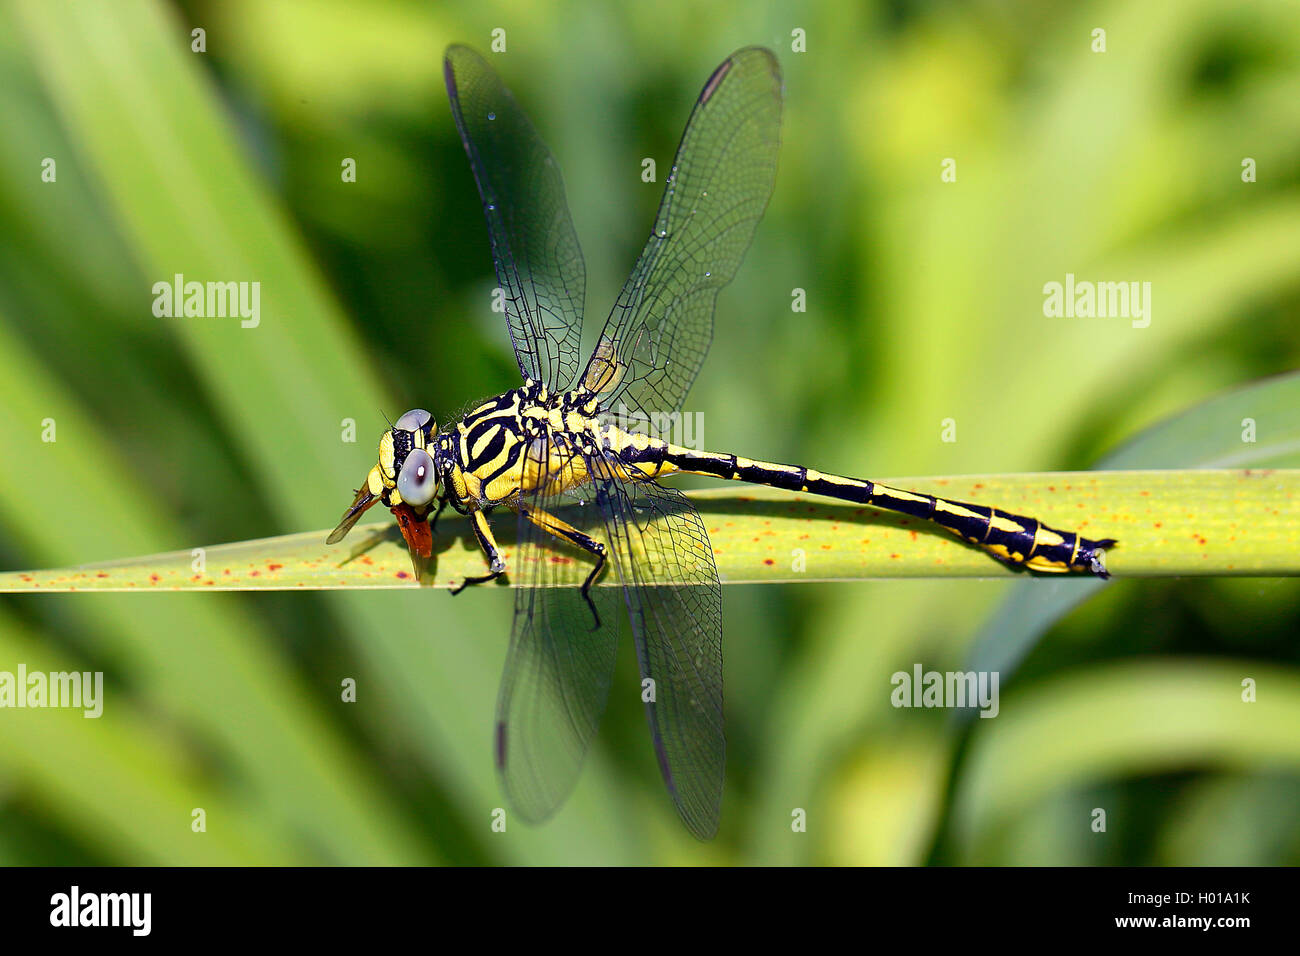 Asian gomphus (Gomphus flavipes), sits on a leaf, Romania Stock Photo